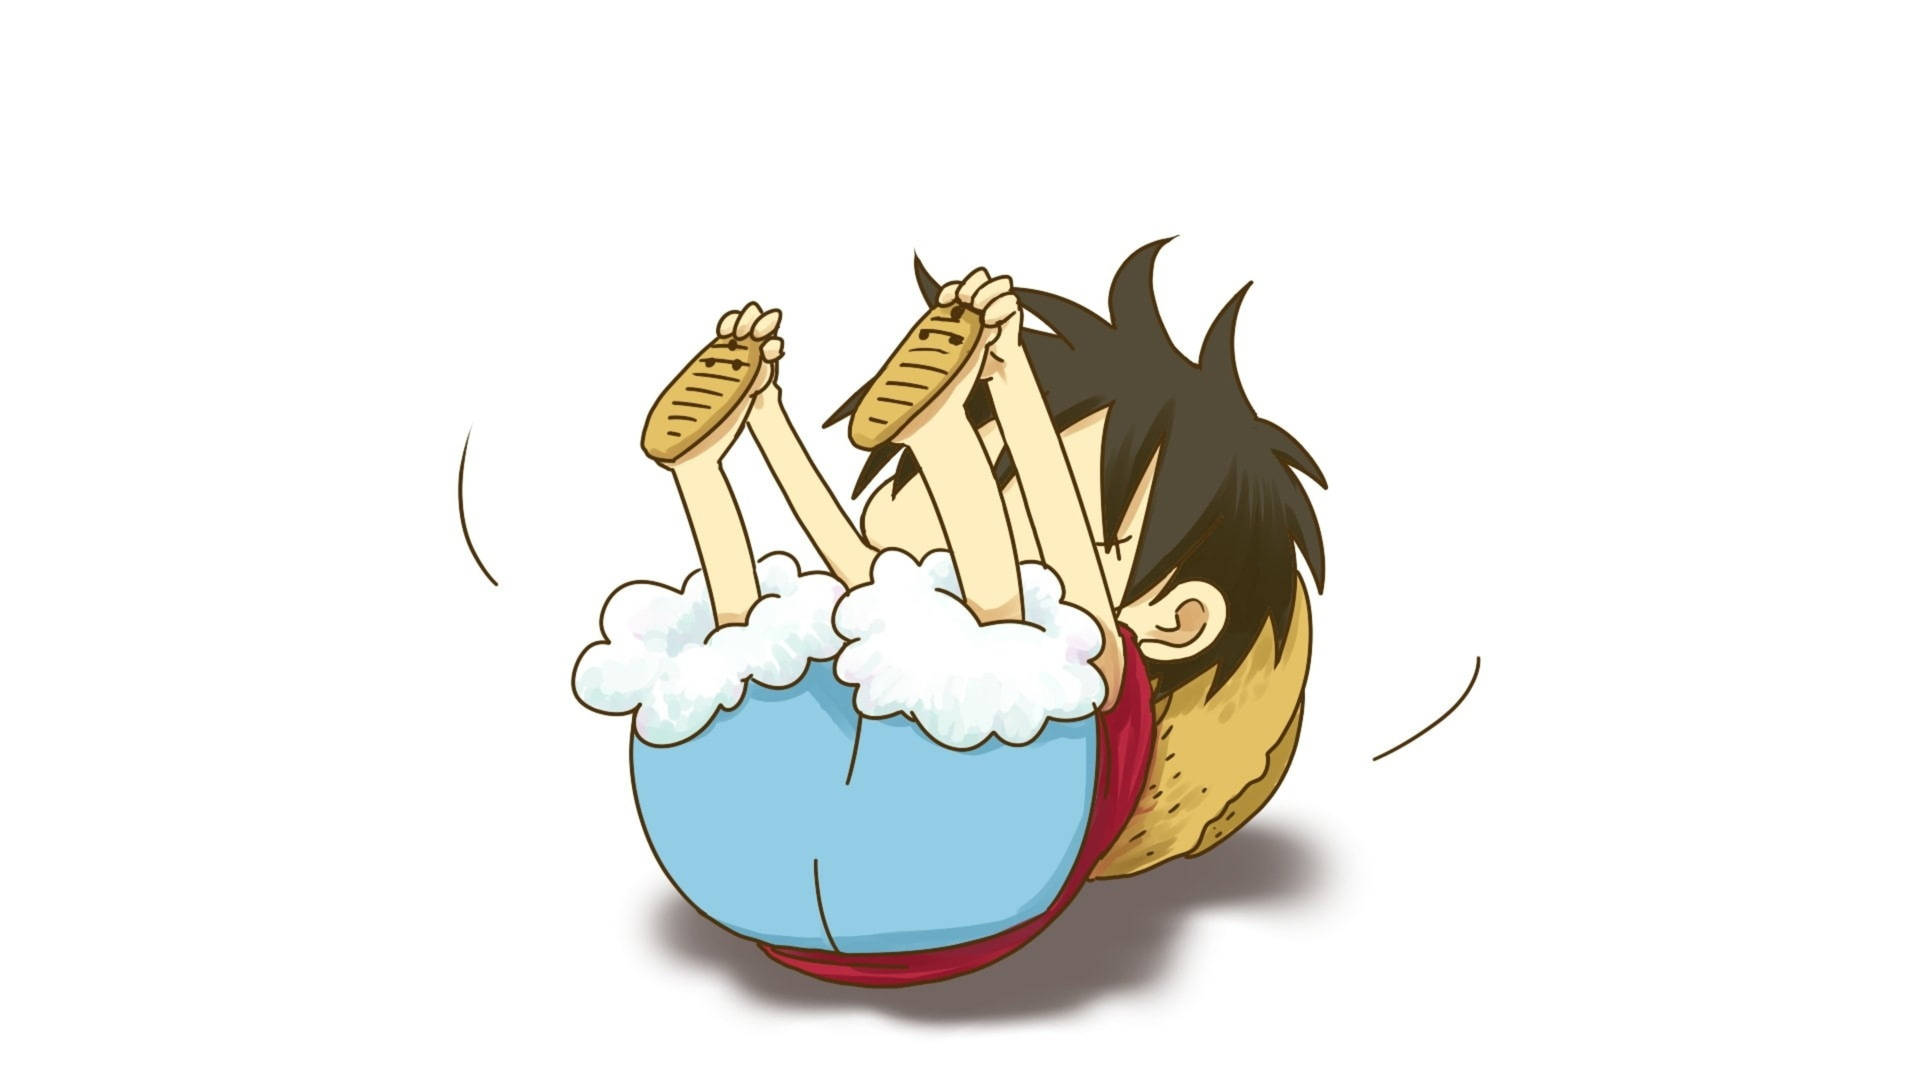 Monkey D Luffy 3840X2160 Wallpaper and Background Image